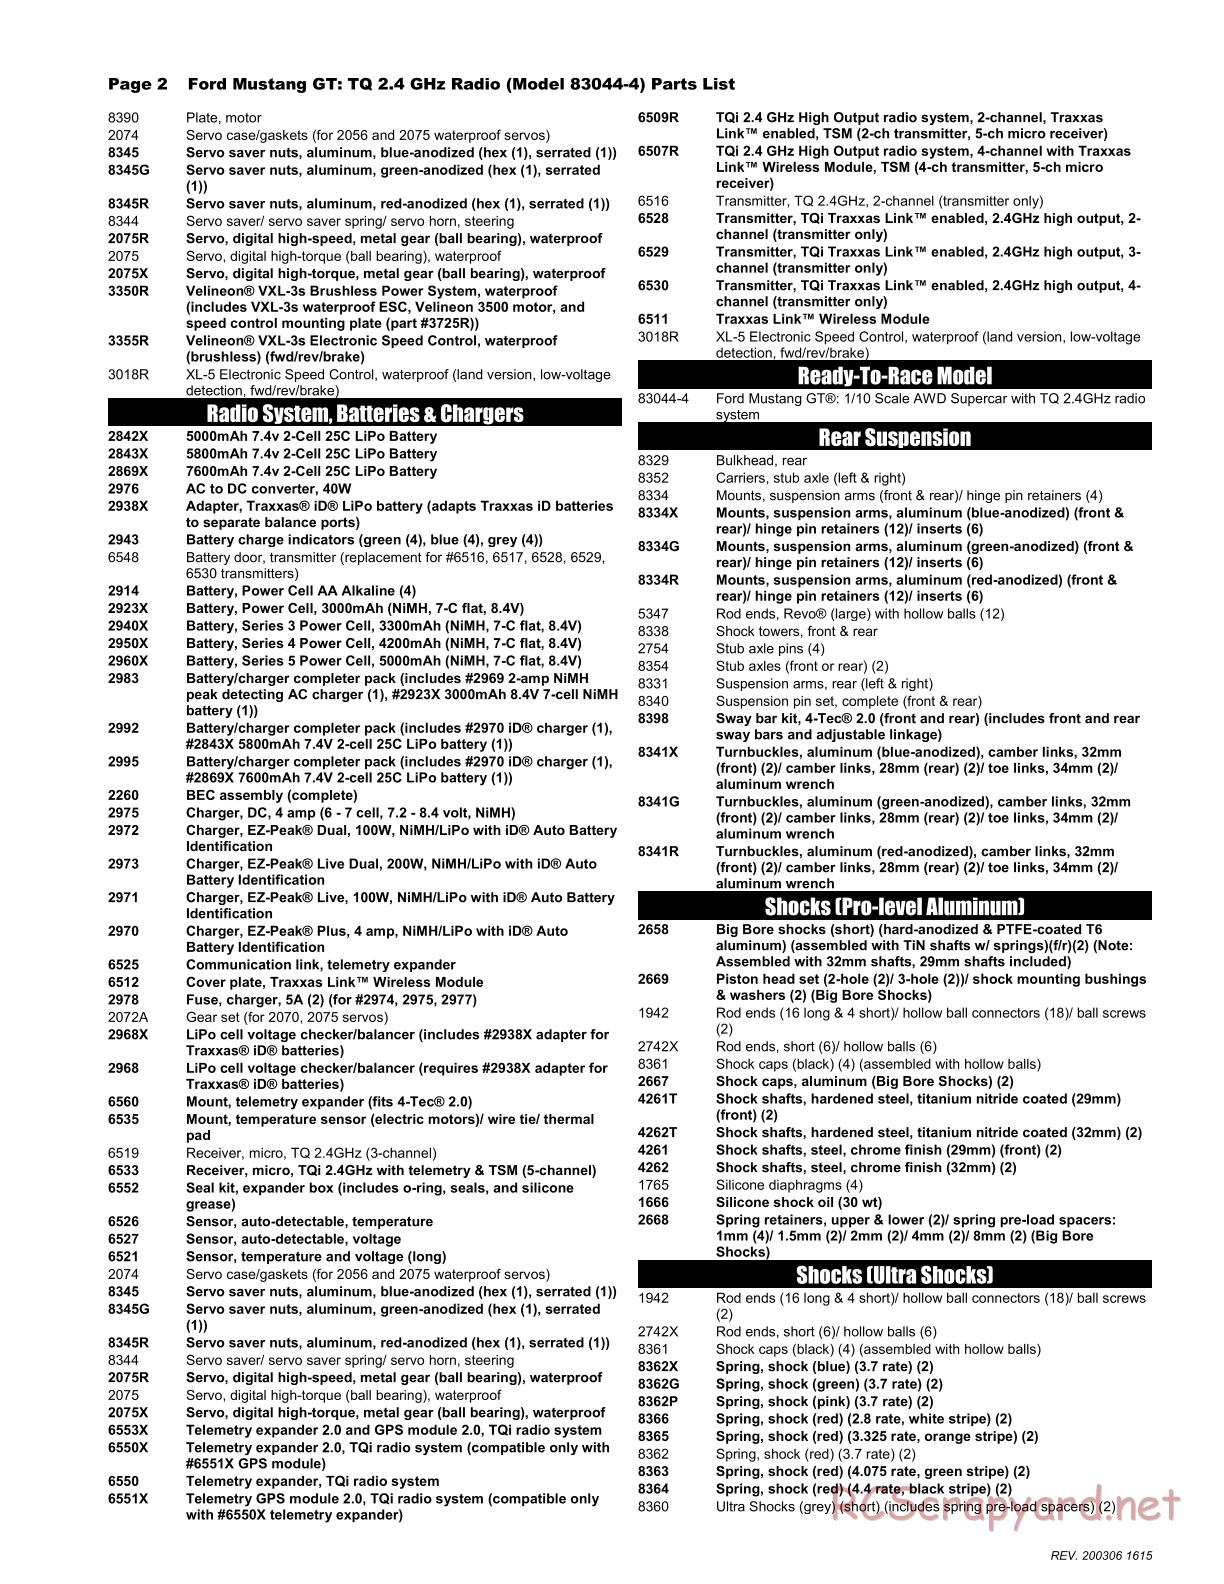 Traxxas - Ford Mustang GT - Parts List - Page 2